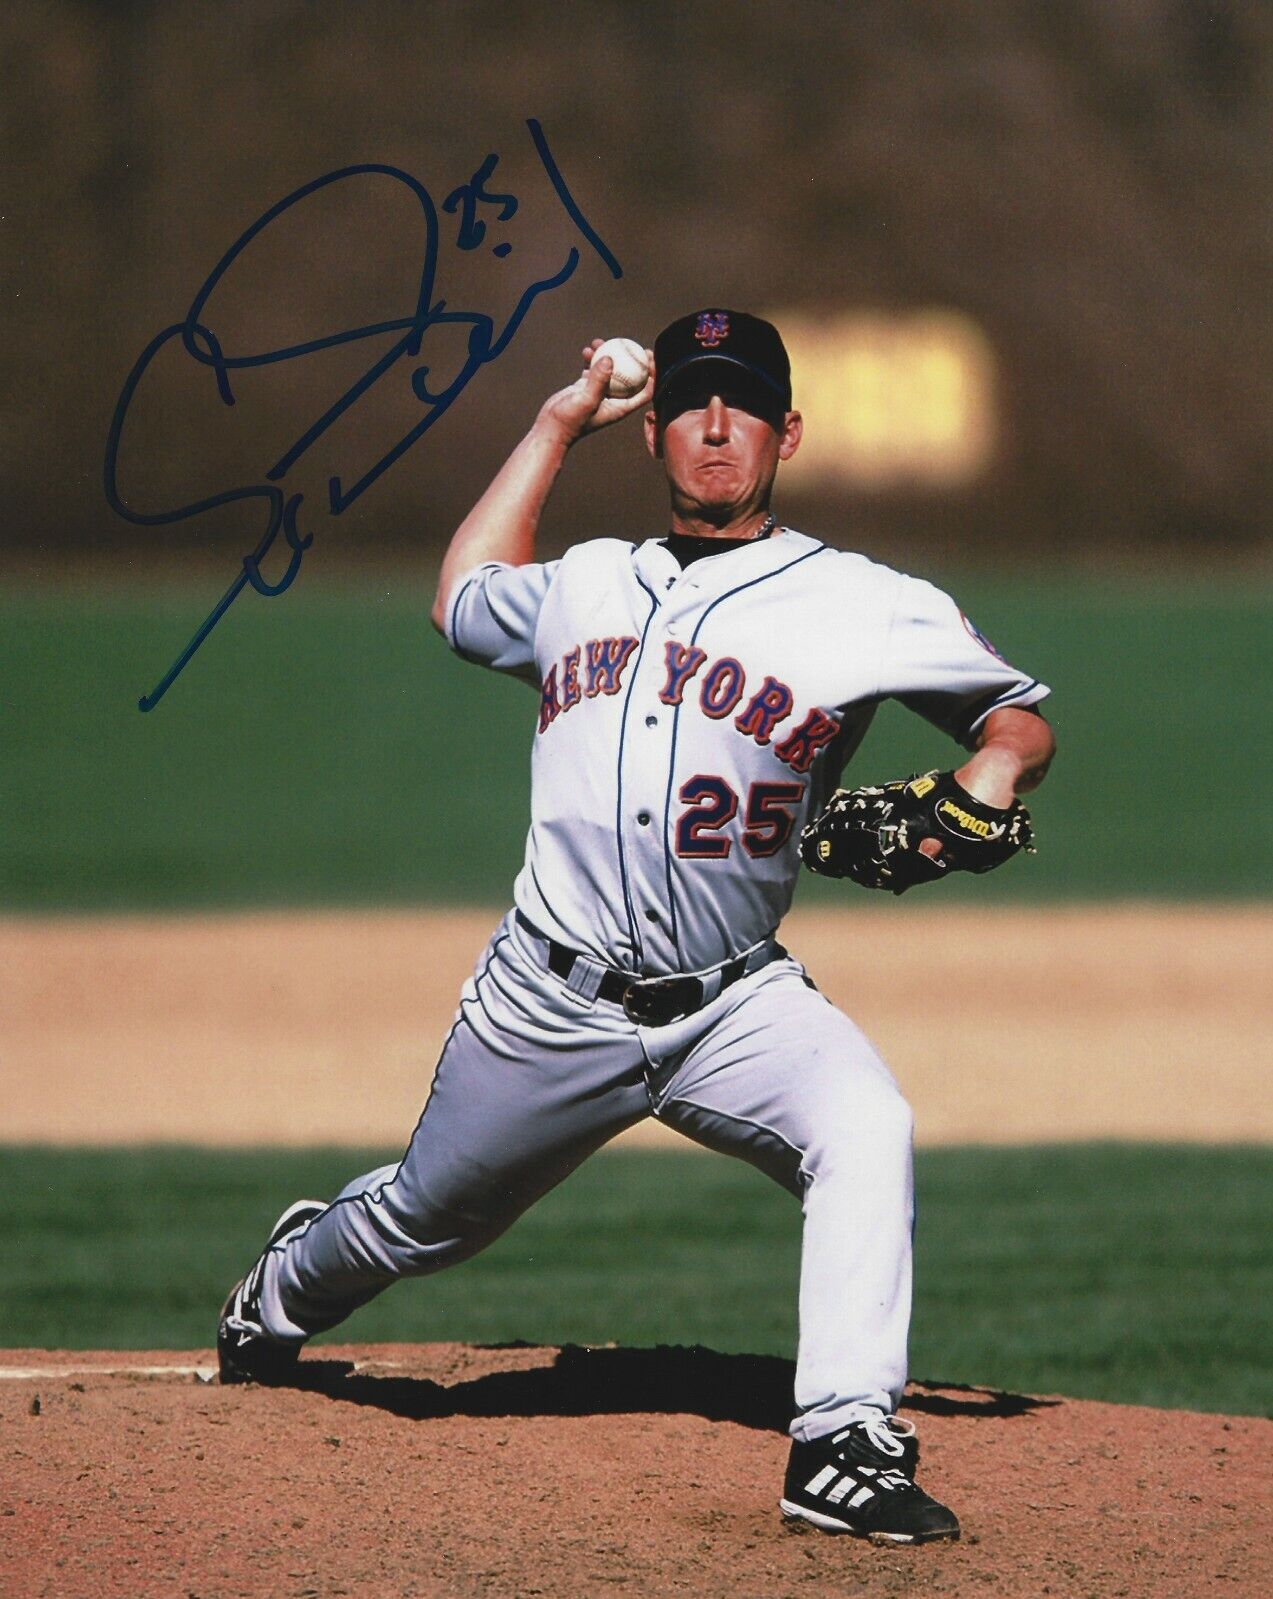 Signed  8x10 SCOTT STRICKLAND NEW YORK METS Autographed photo - COA 